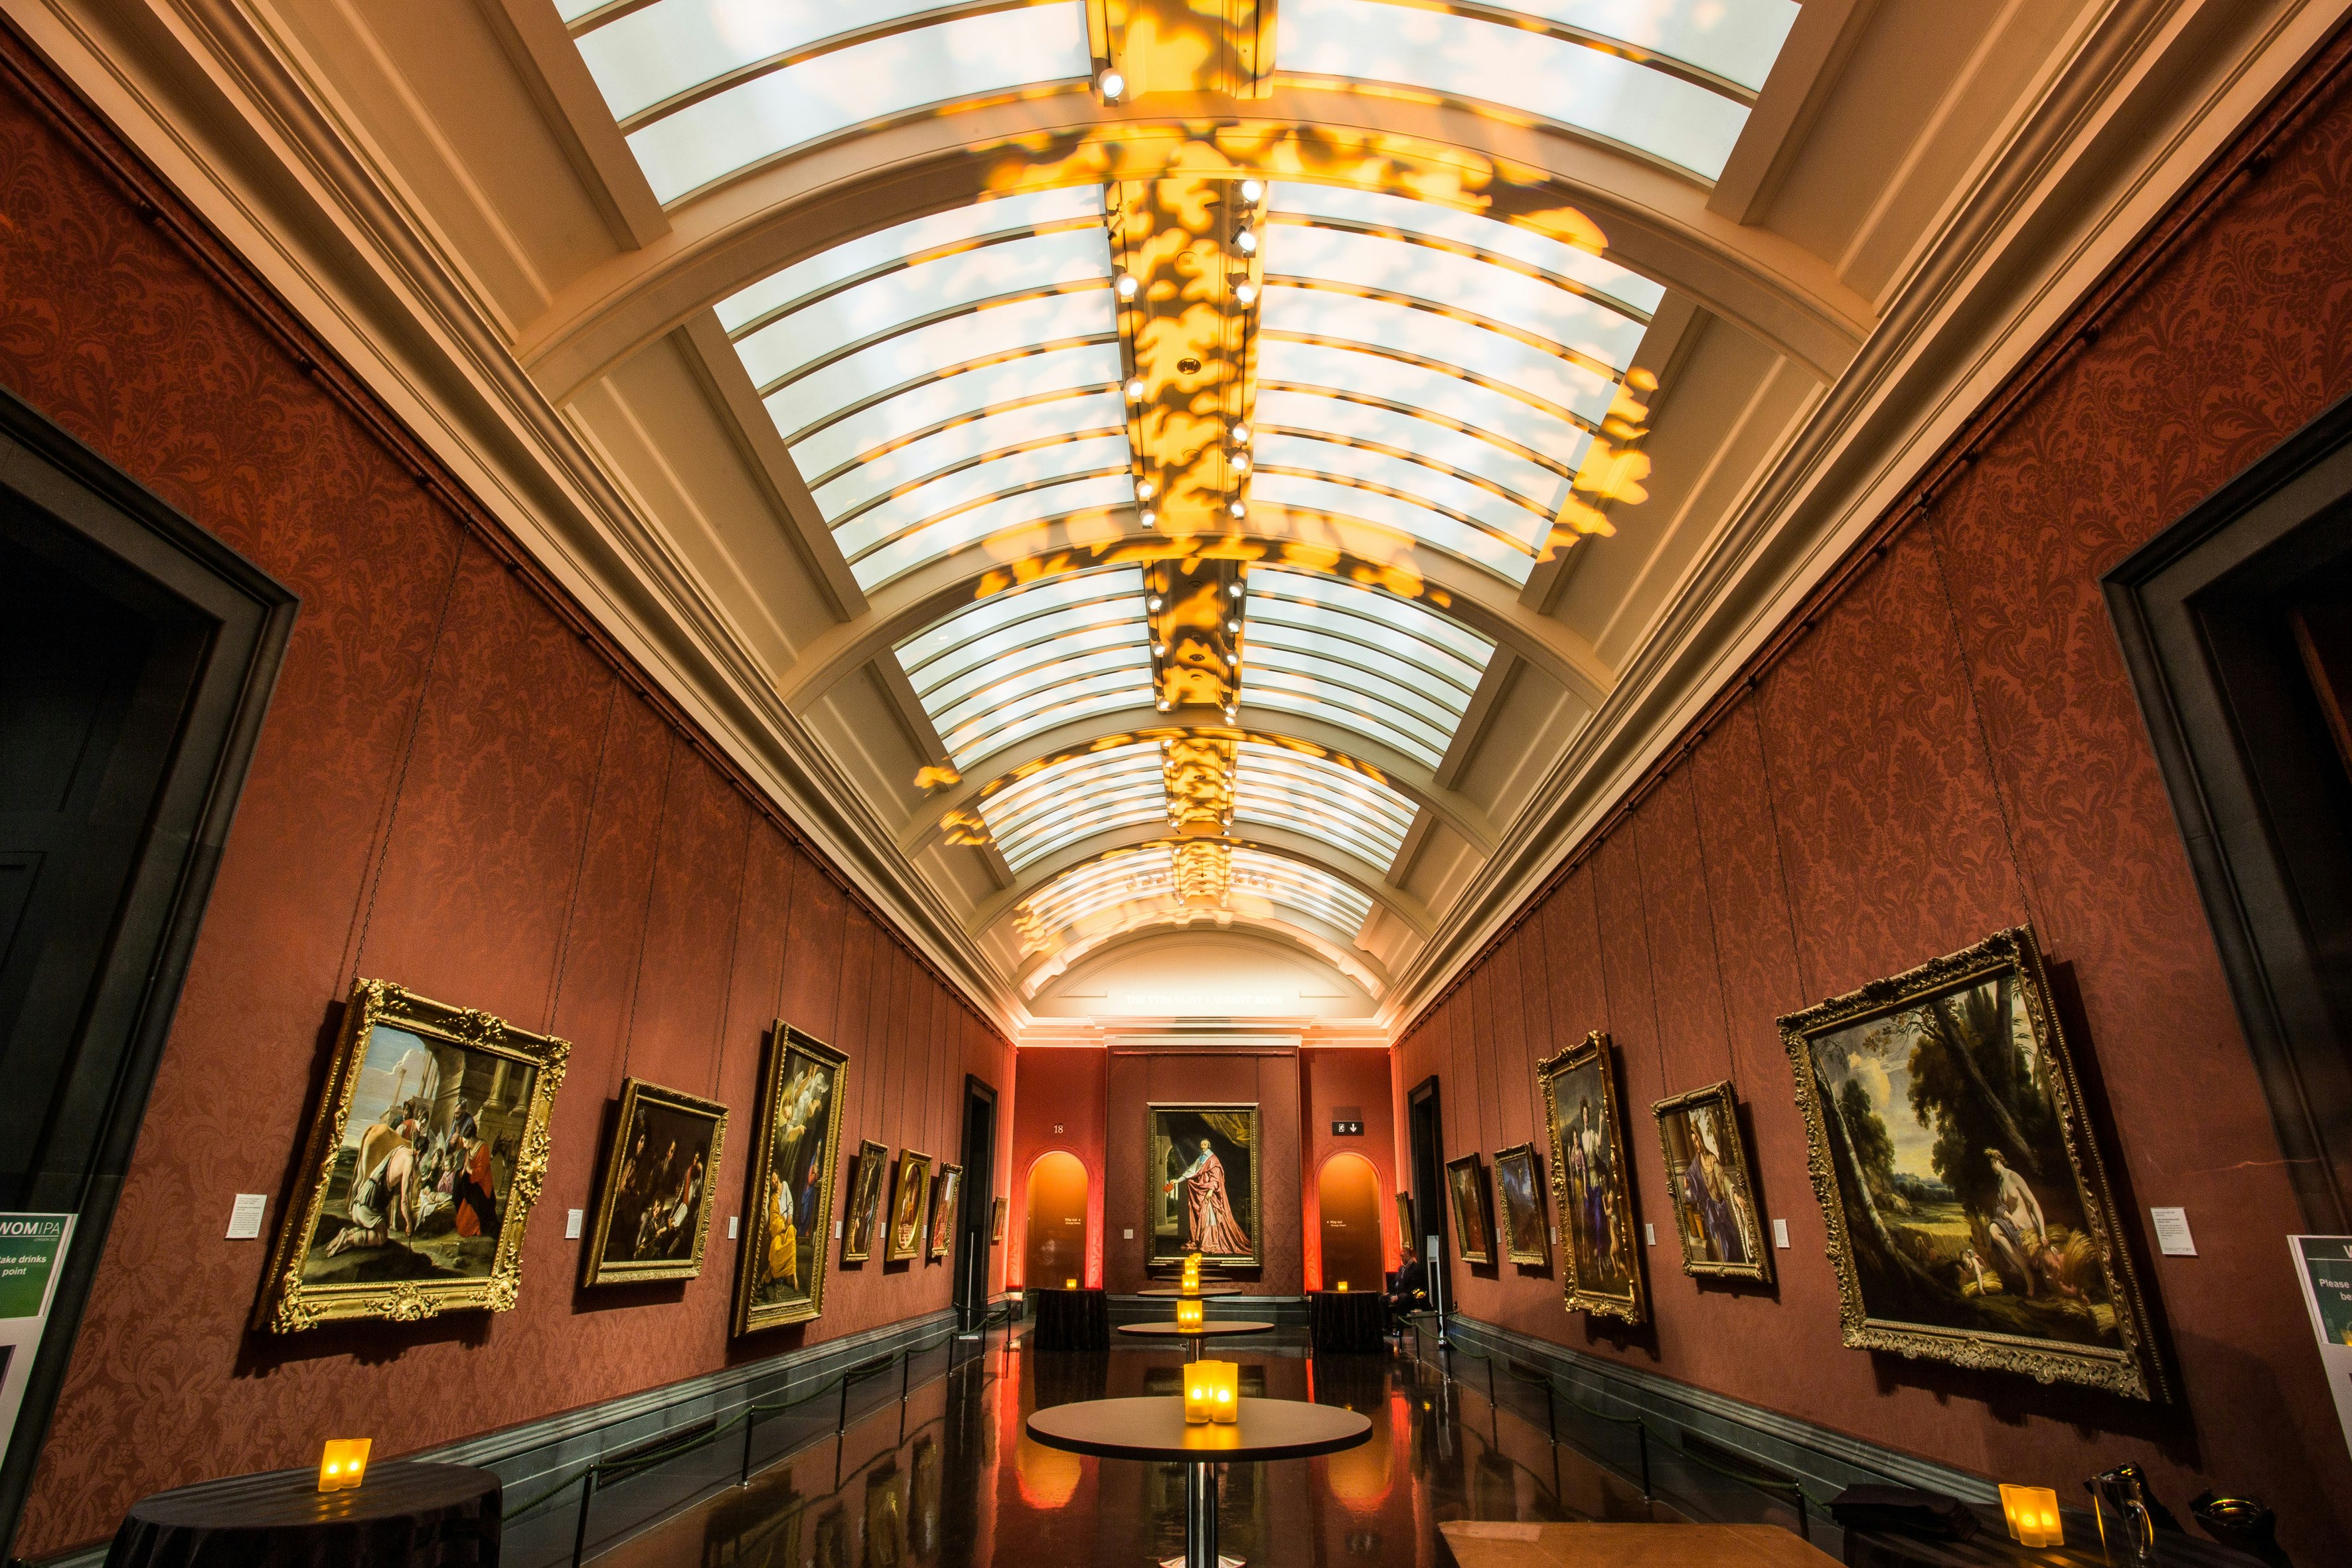 The National Gallery - Yves Saint Laurent Room image 5